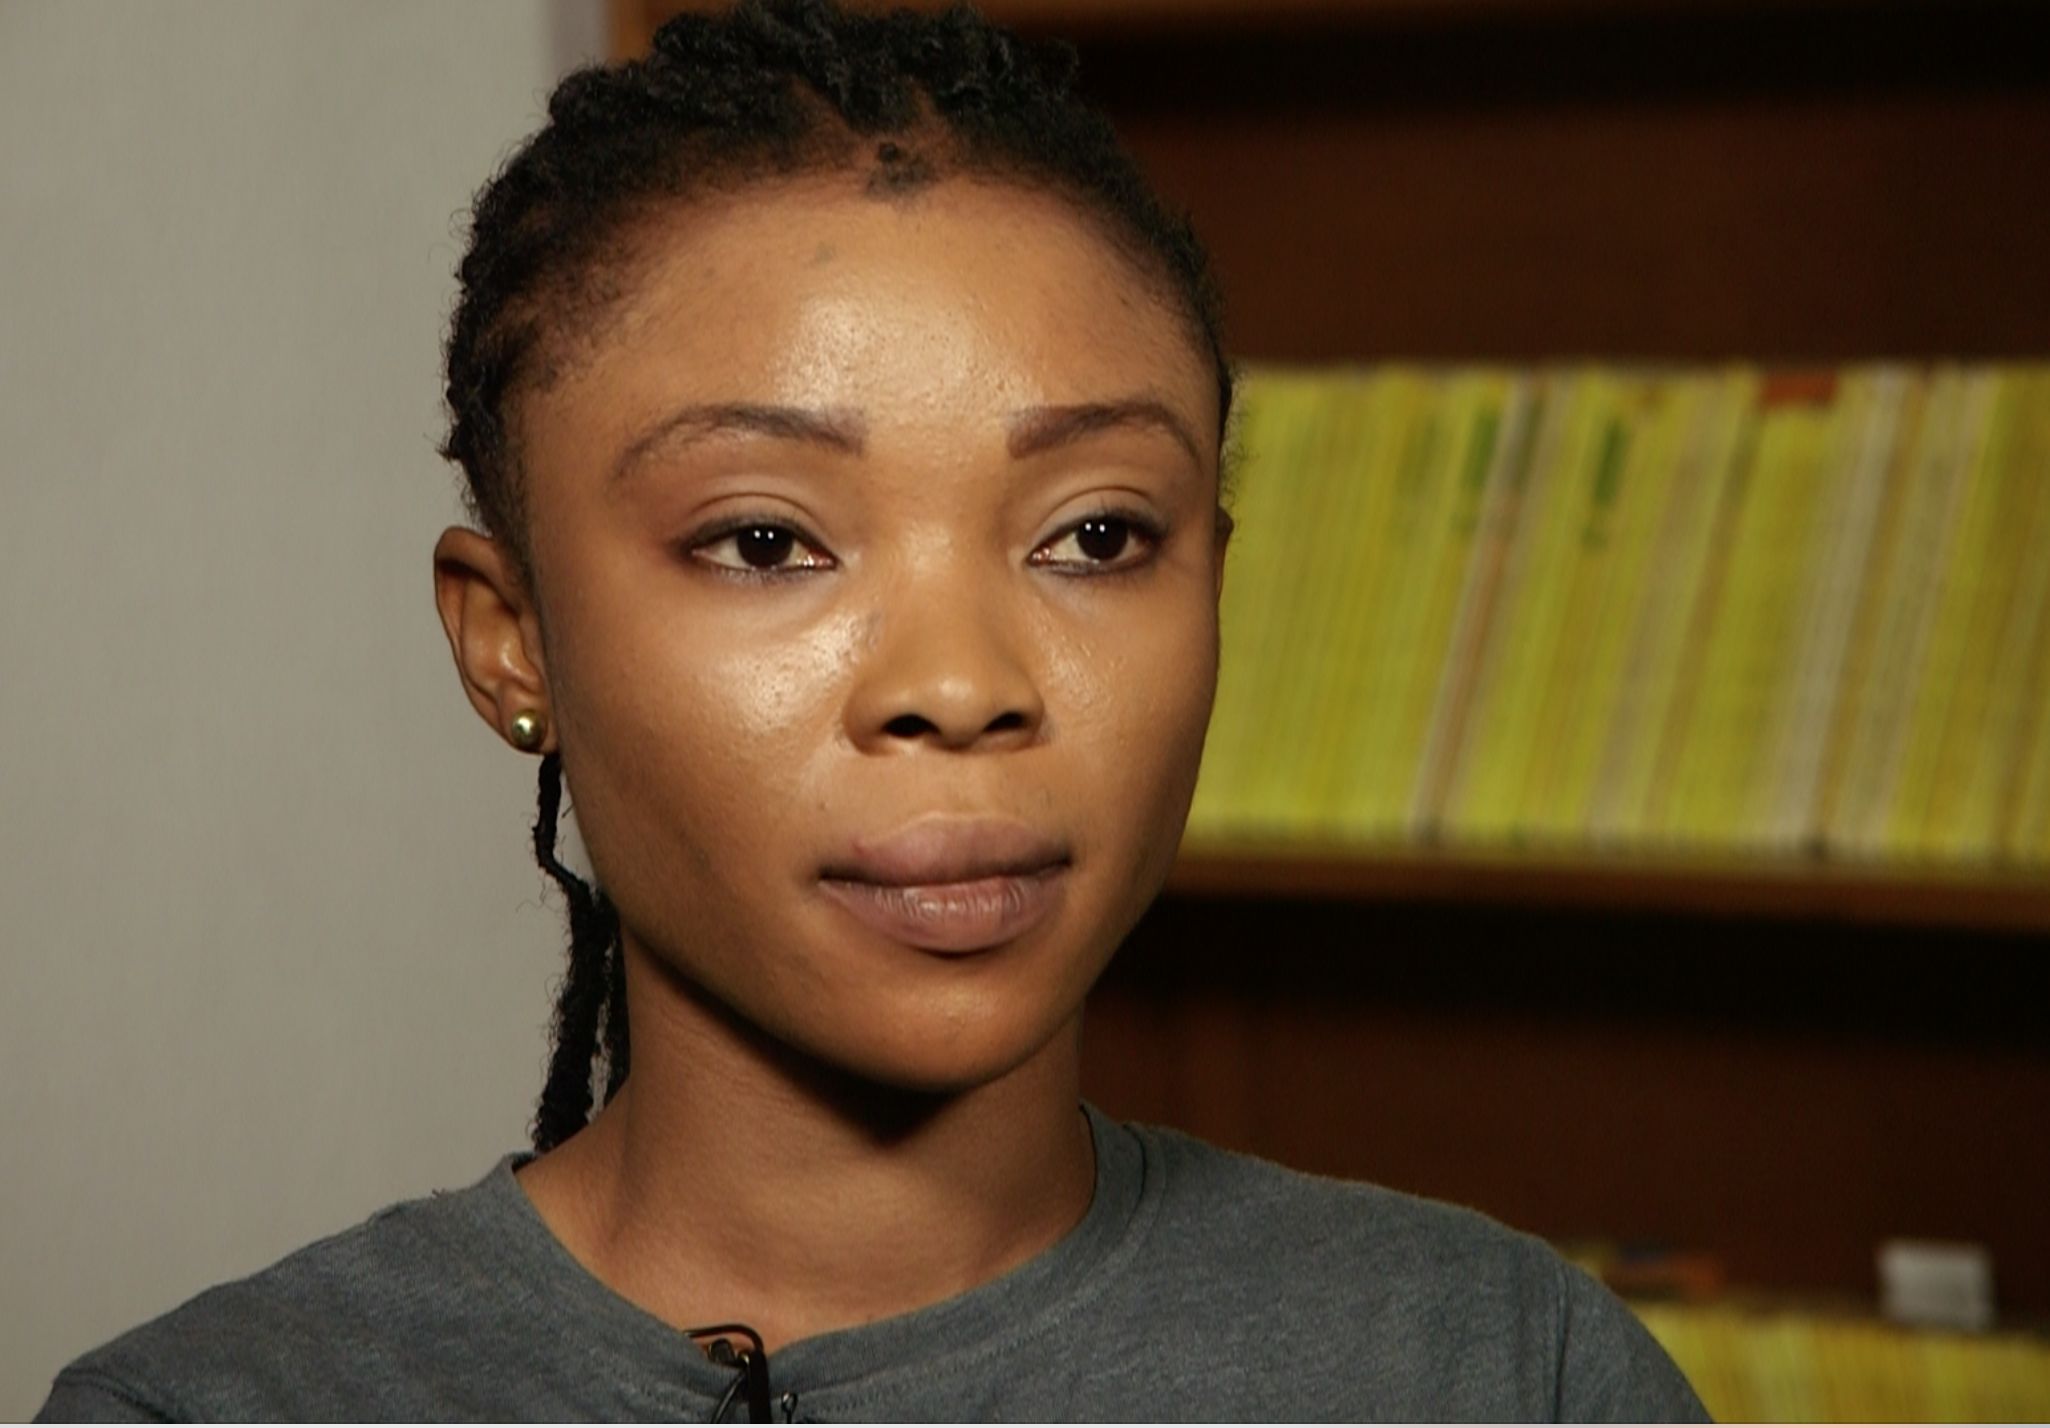 South African University Student Sex Videos - Monica Osagie: Nigerian student who taped lecturer asking for sex speaks  out | CNN